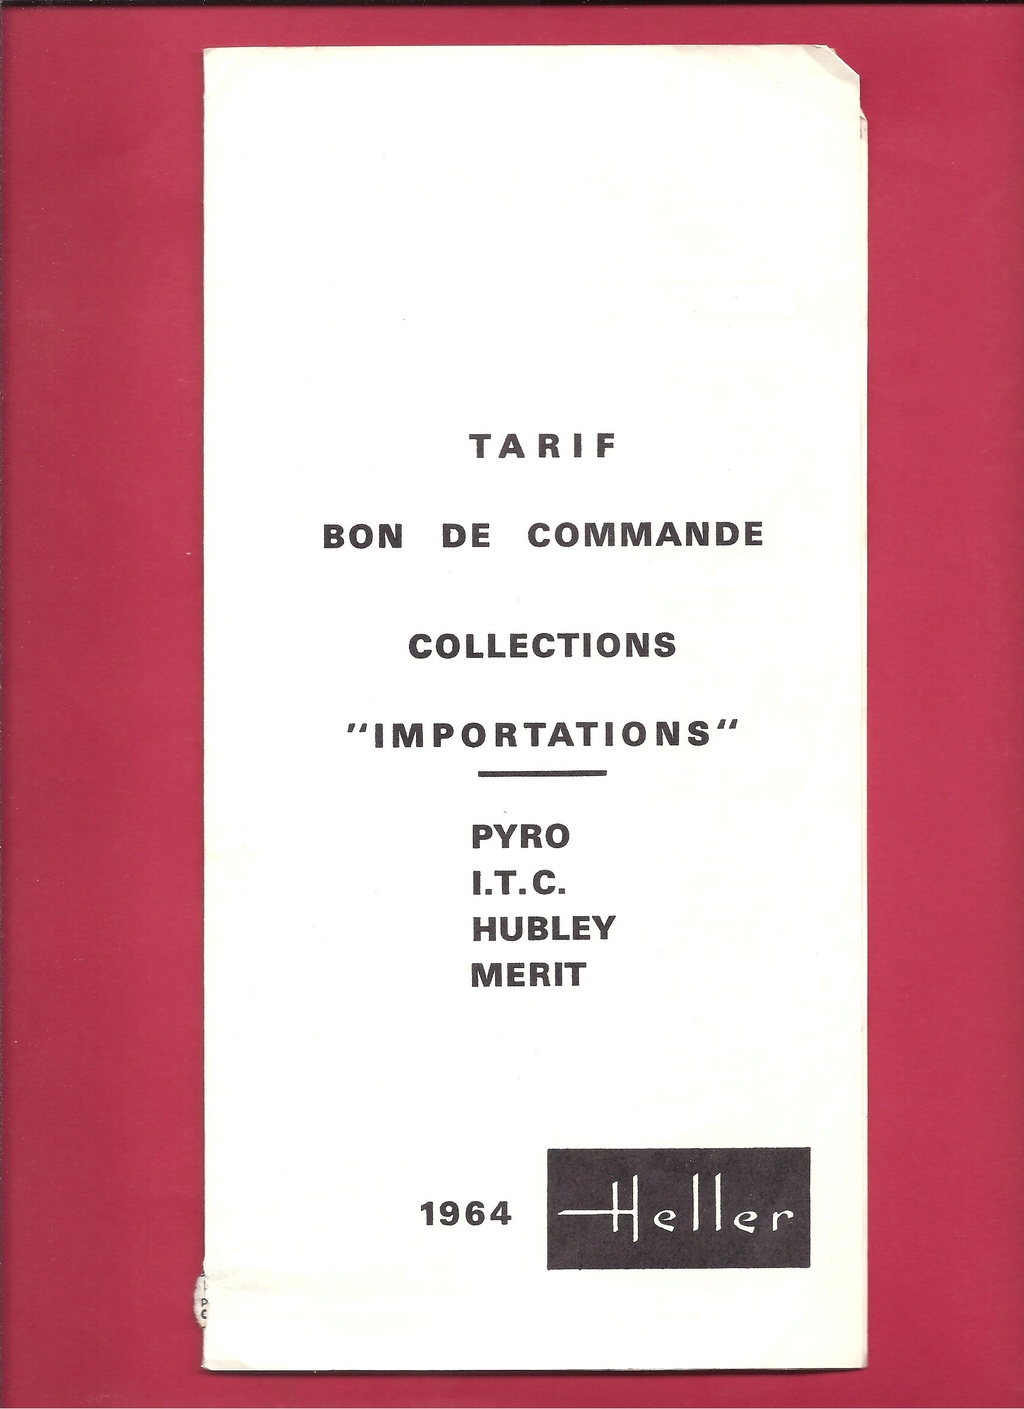 [1964] tarif revendeur collections importations 1964 Hell1770